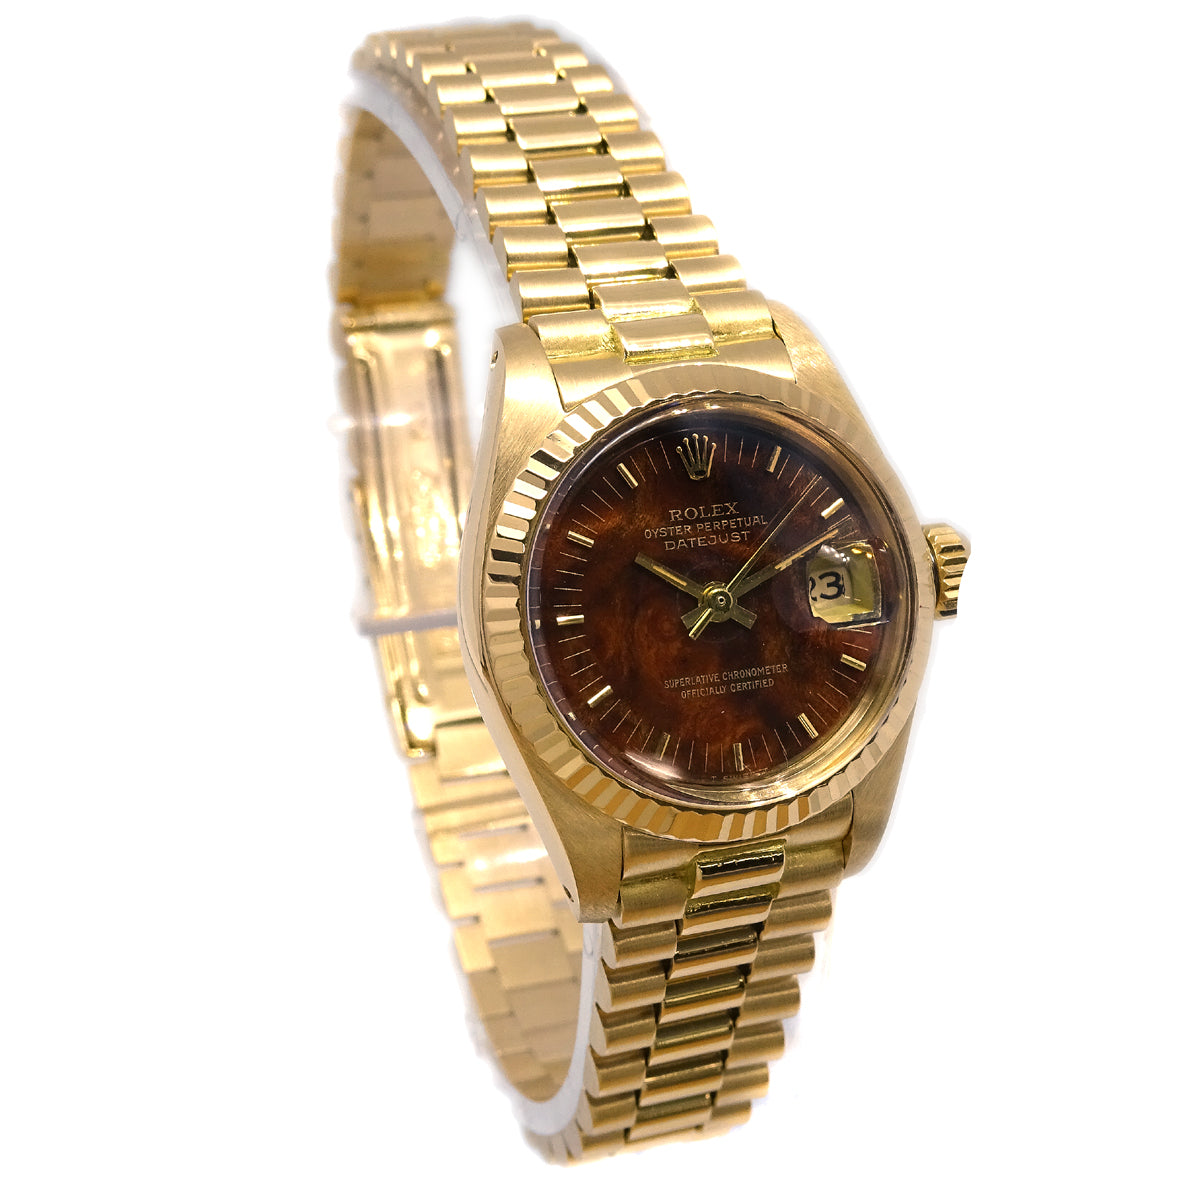 Rolex 1981-1982 Oyster Perpetual Datejust 26mm